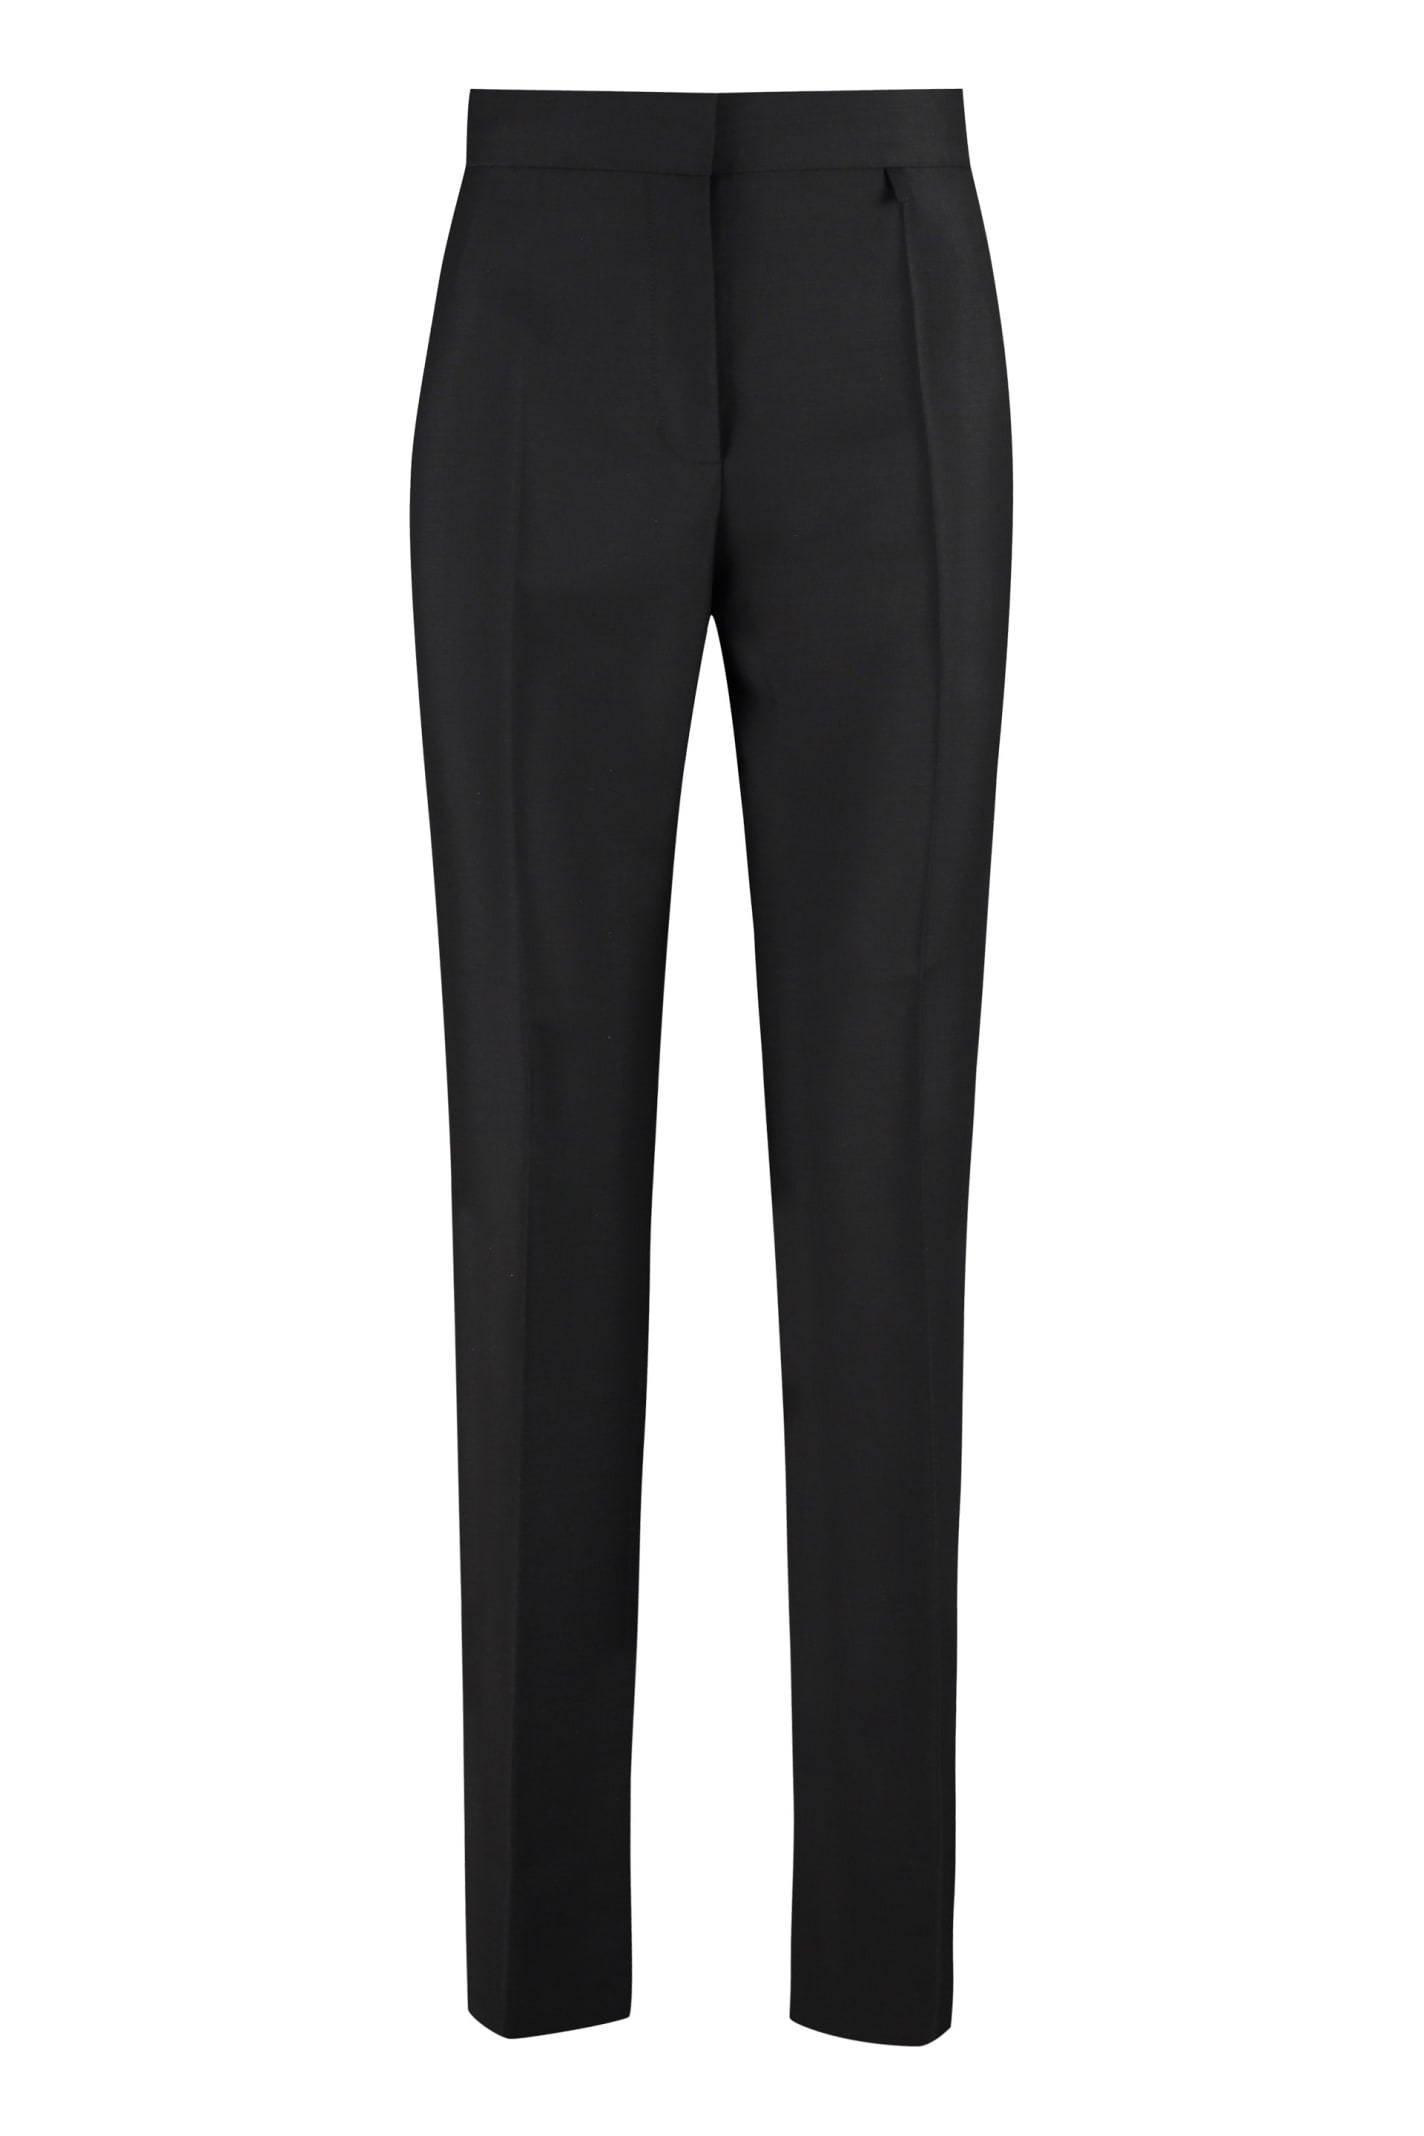 Givenchy Wool Blend Tailored Trousers